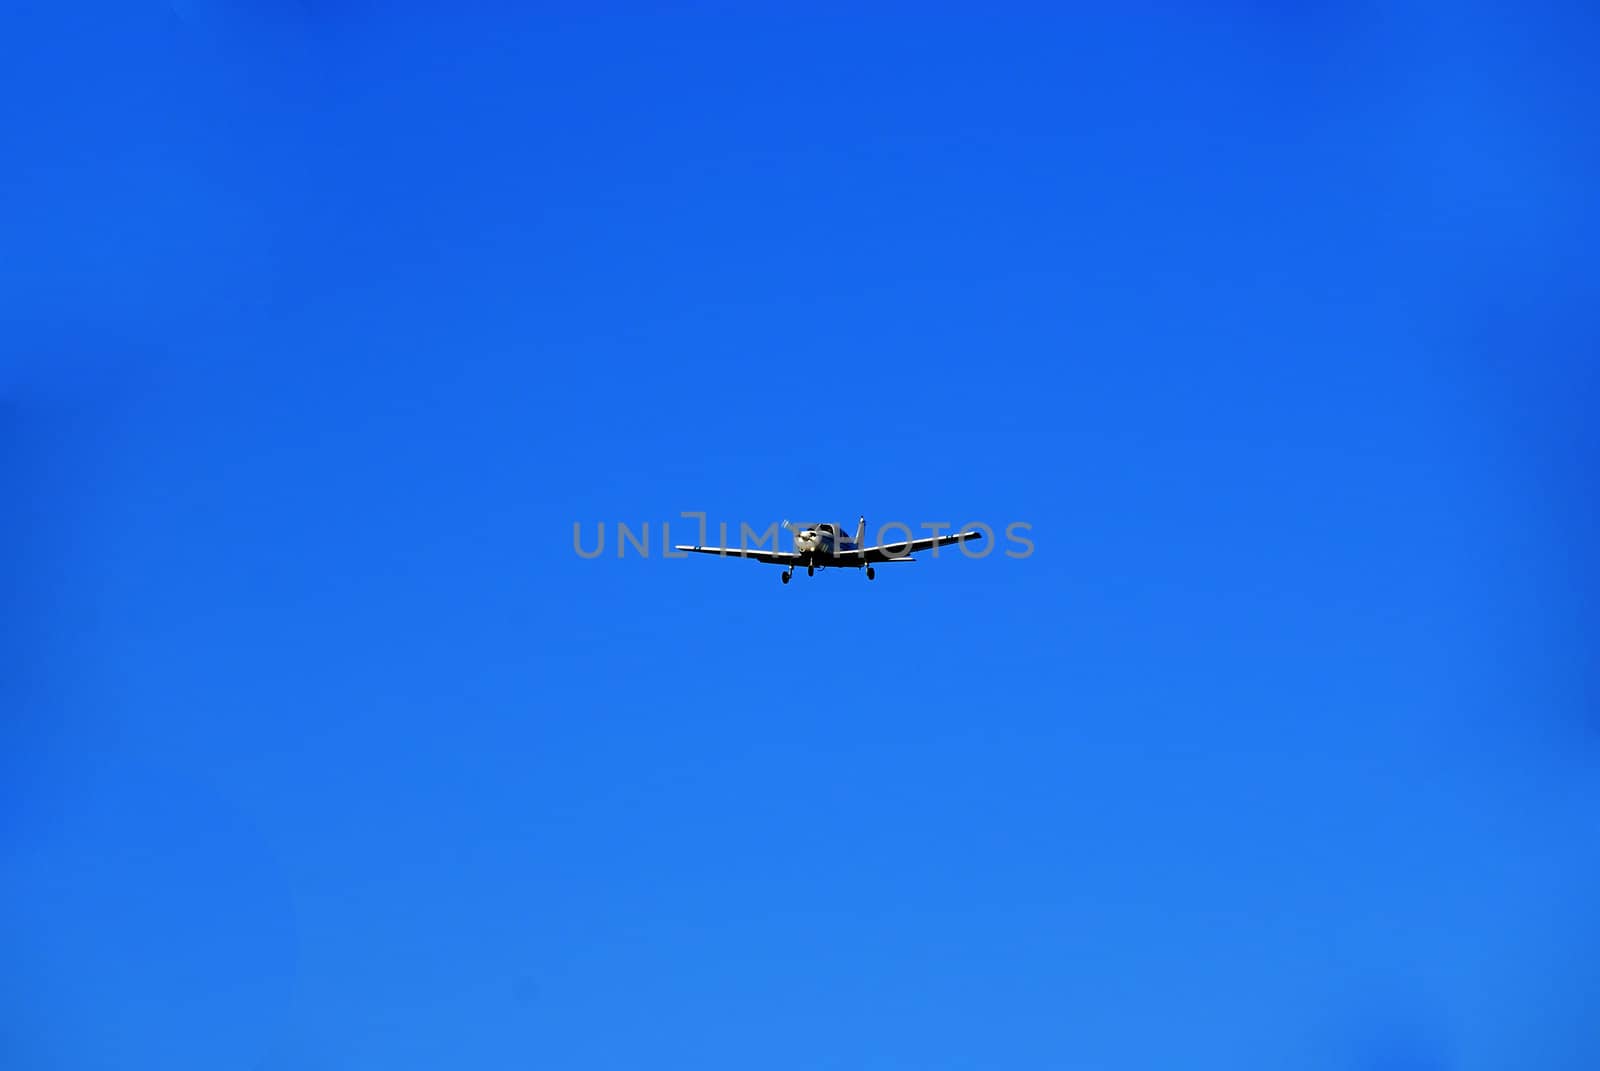 A trainer glider plane isolated against a clear blue sky